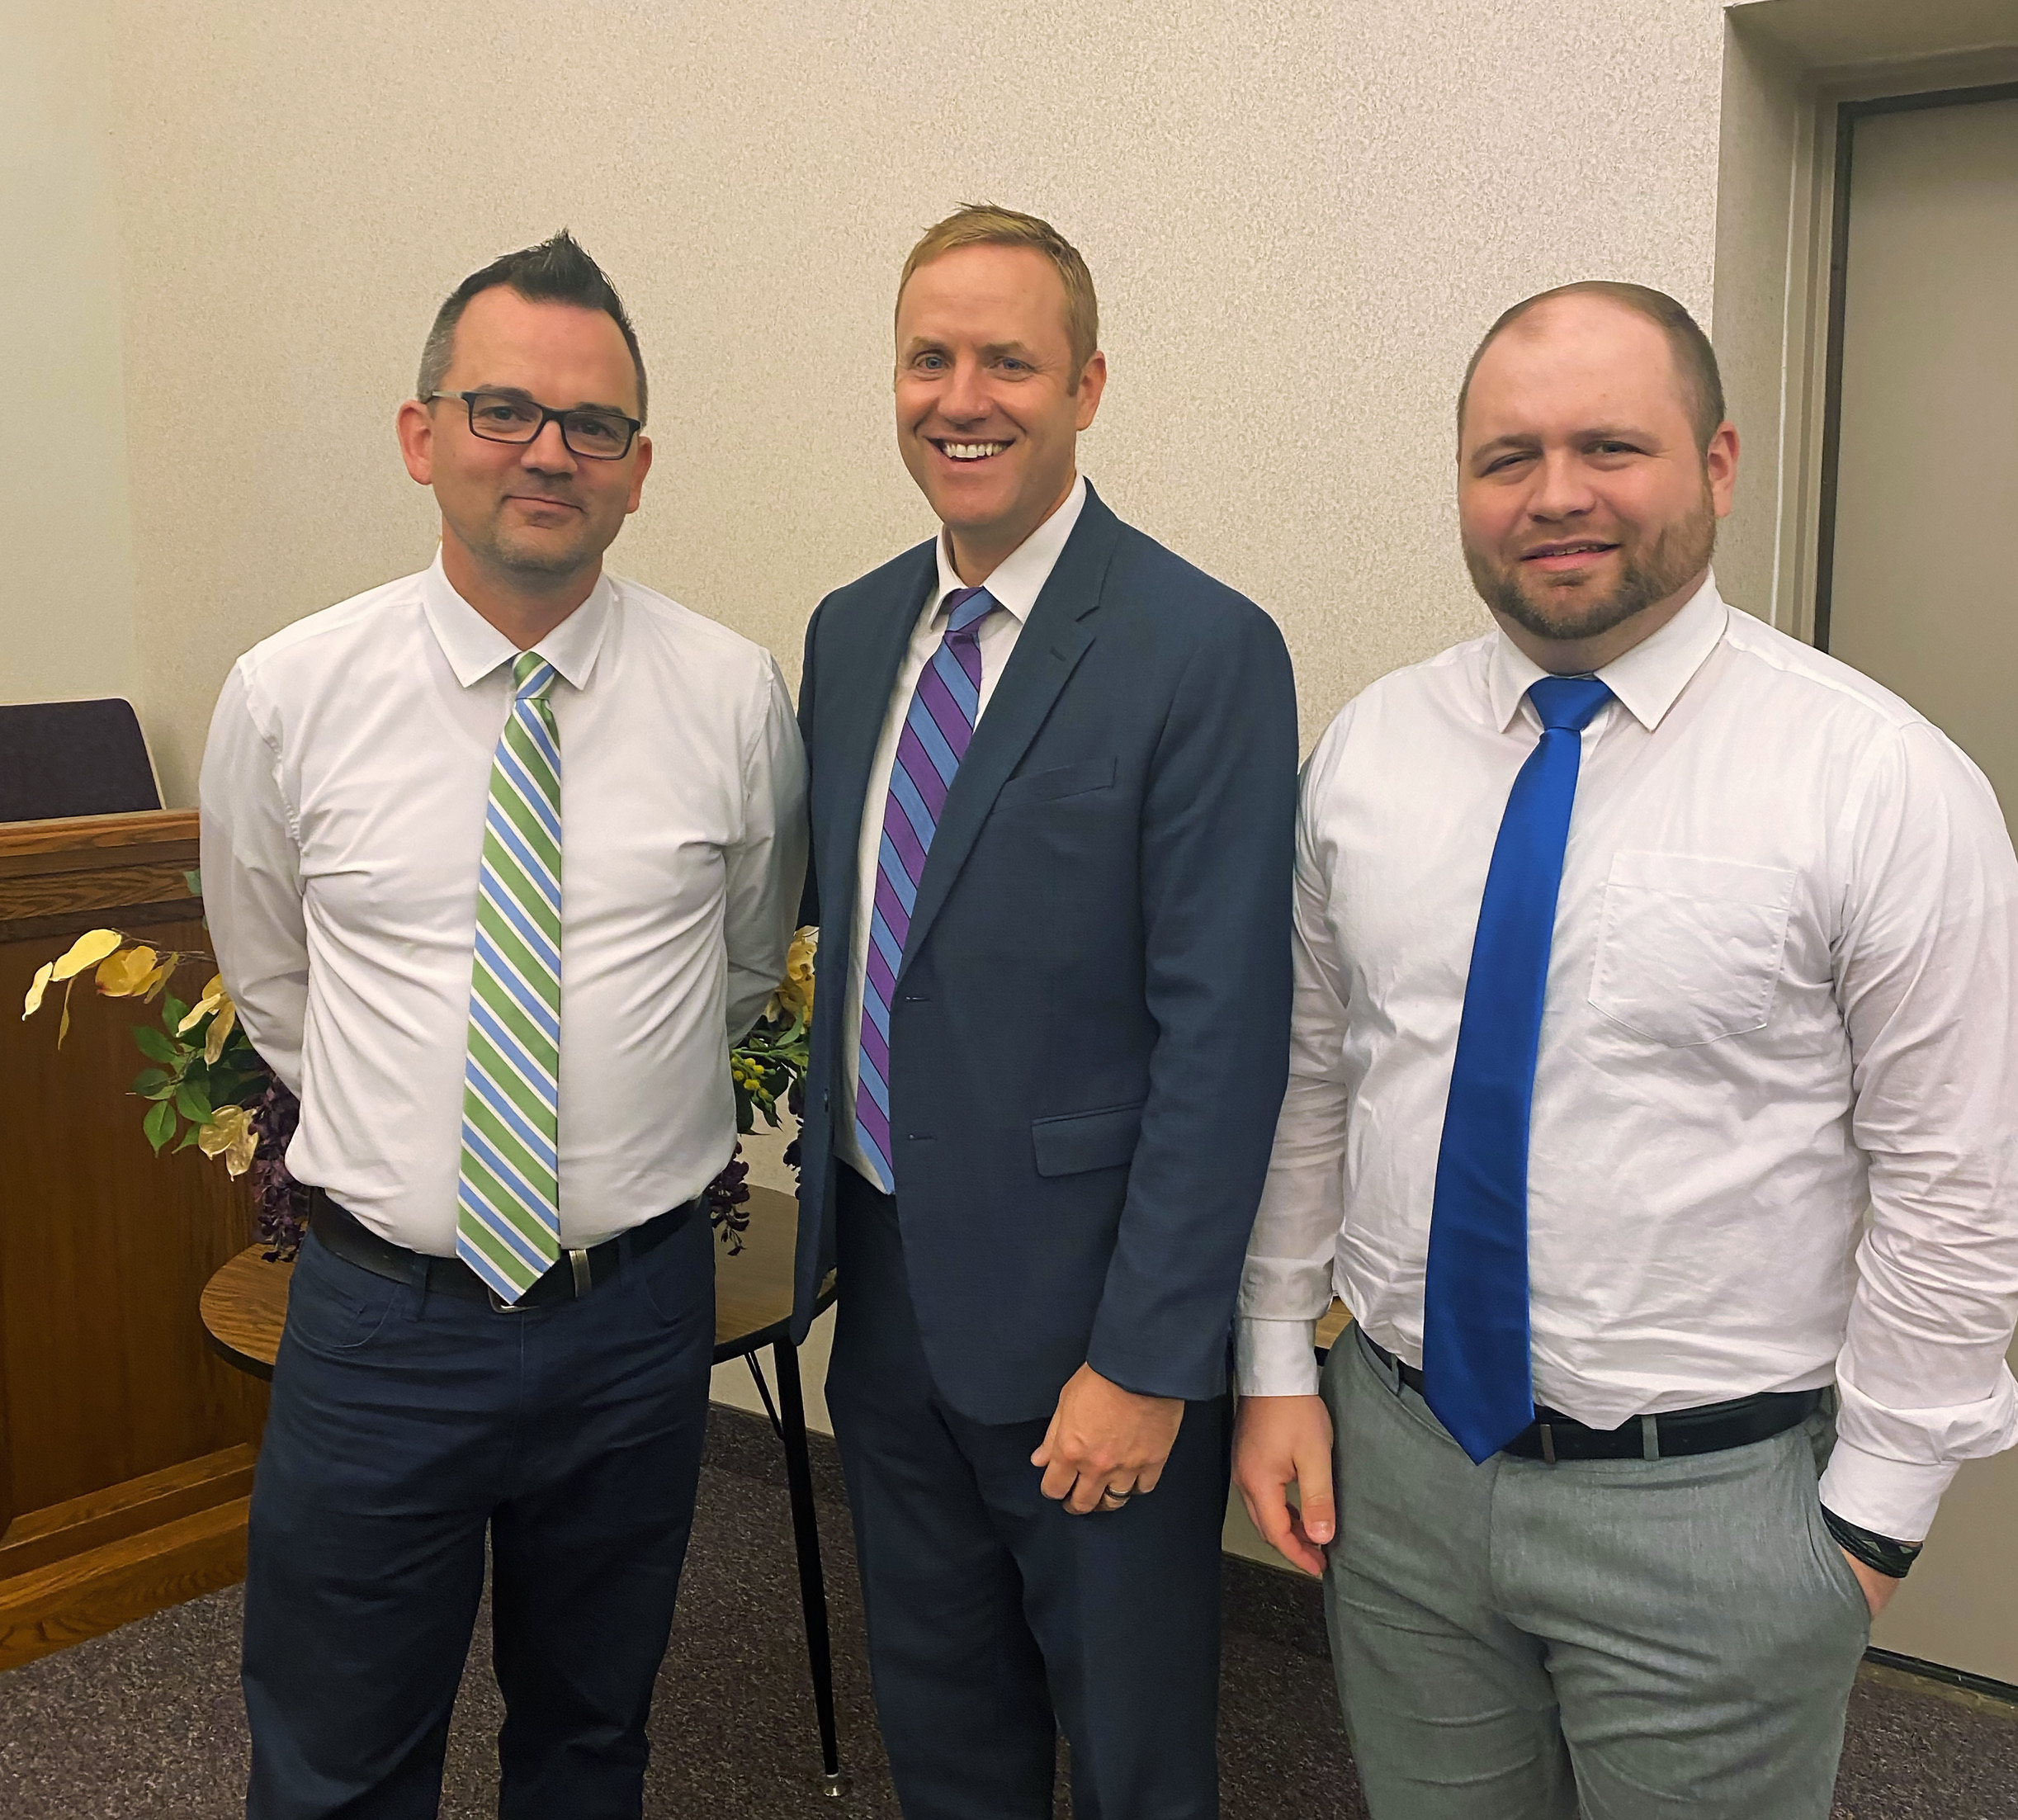 The Bishopric of the Kansas City First Ward of The Church of Jesus Christ of Latter-day Saints includes Bishop David Frandsen (center), First Counselor Jeff Kempton (green tie) and Second Counselor Tim Ellis (blue tie).